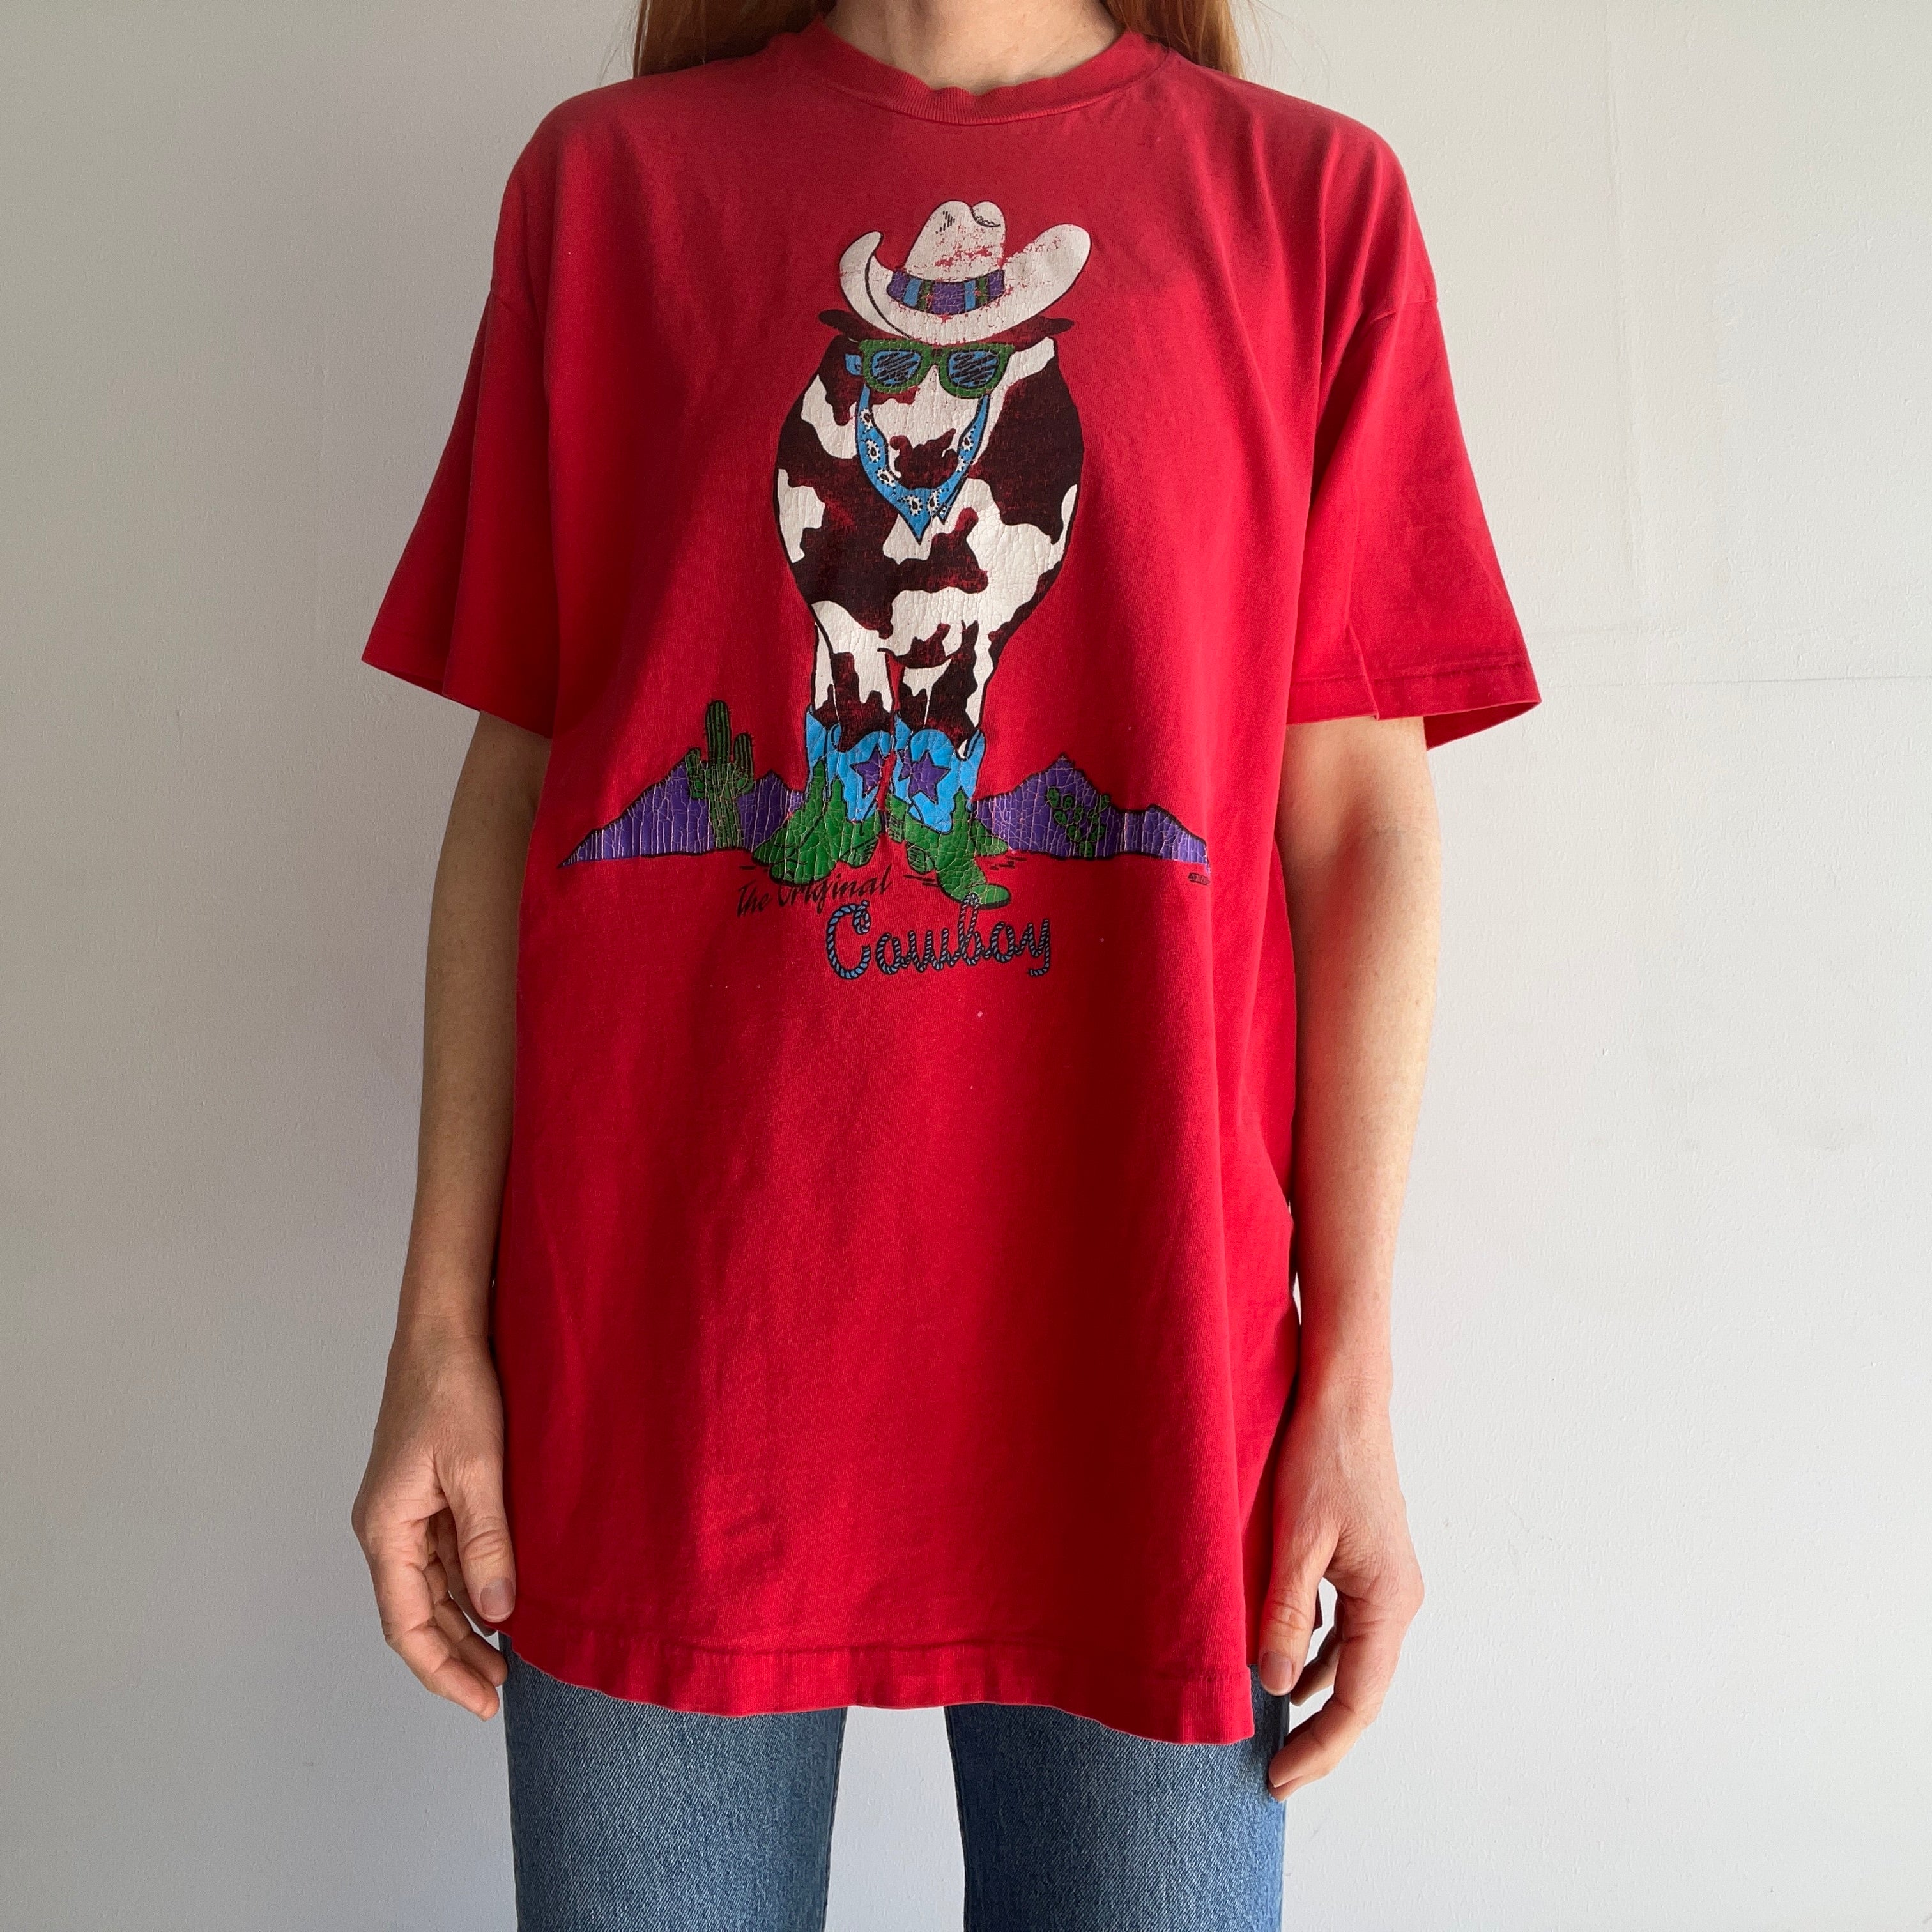 1991 Cowboy Literally and Figuratively T-Shirt